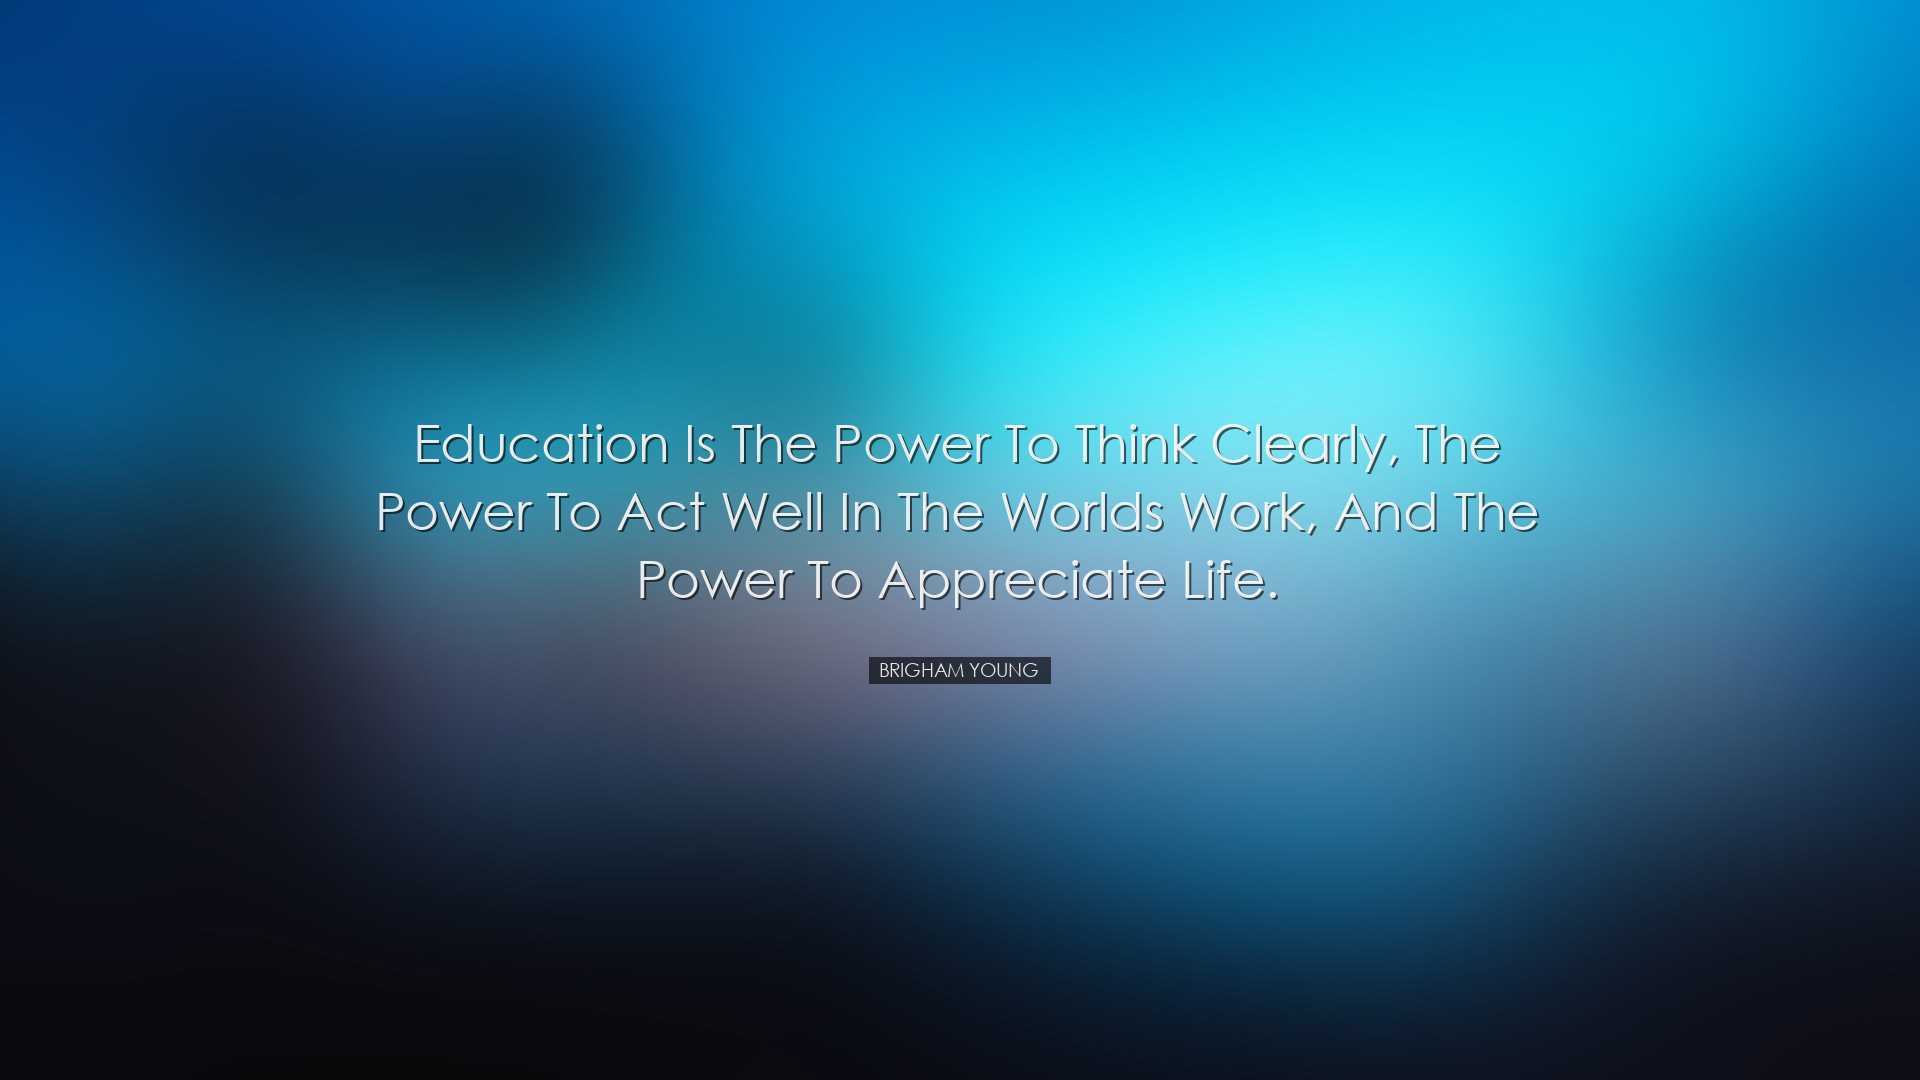 Education is the power to think clearly, the power to act well in